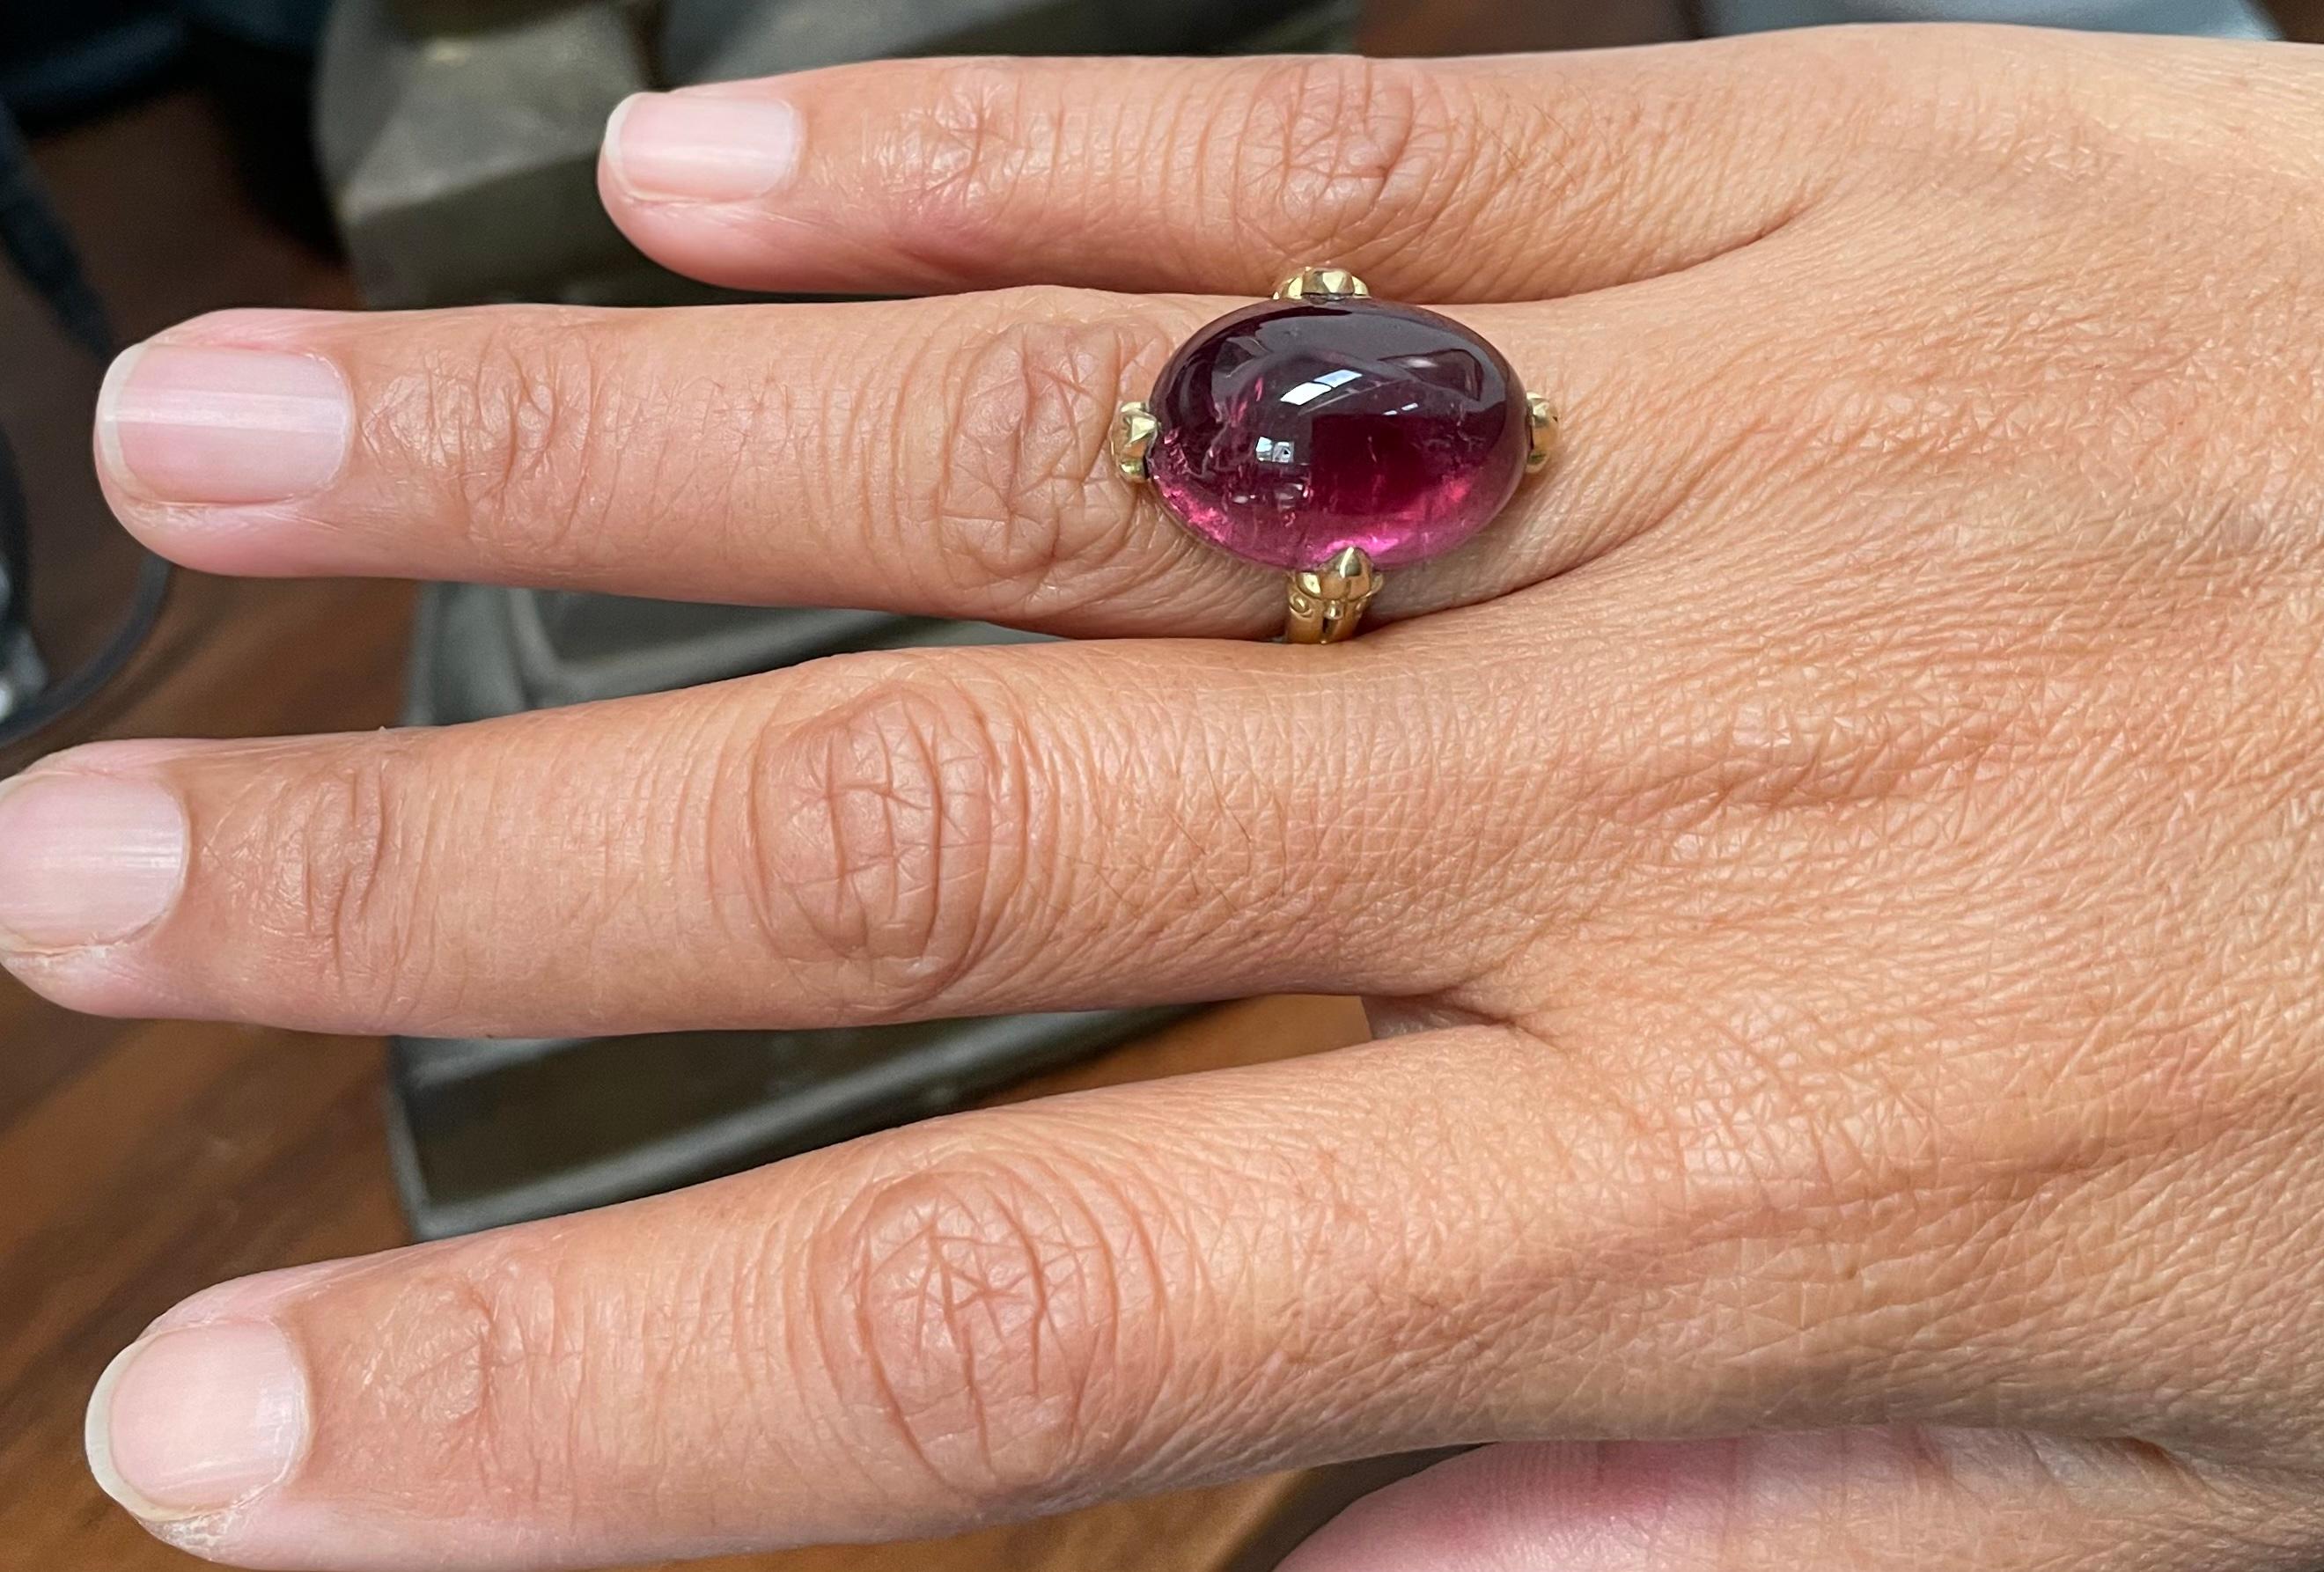 Steven Battelle 21.7 Carat Pink Tourmaline 18K Ring In New Condition For Sale In Soquel, CA